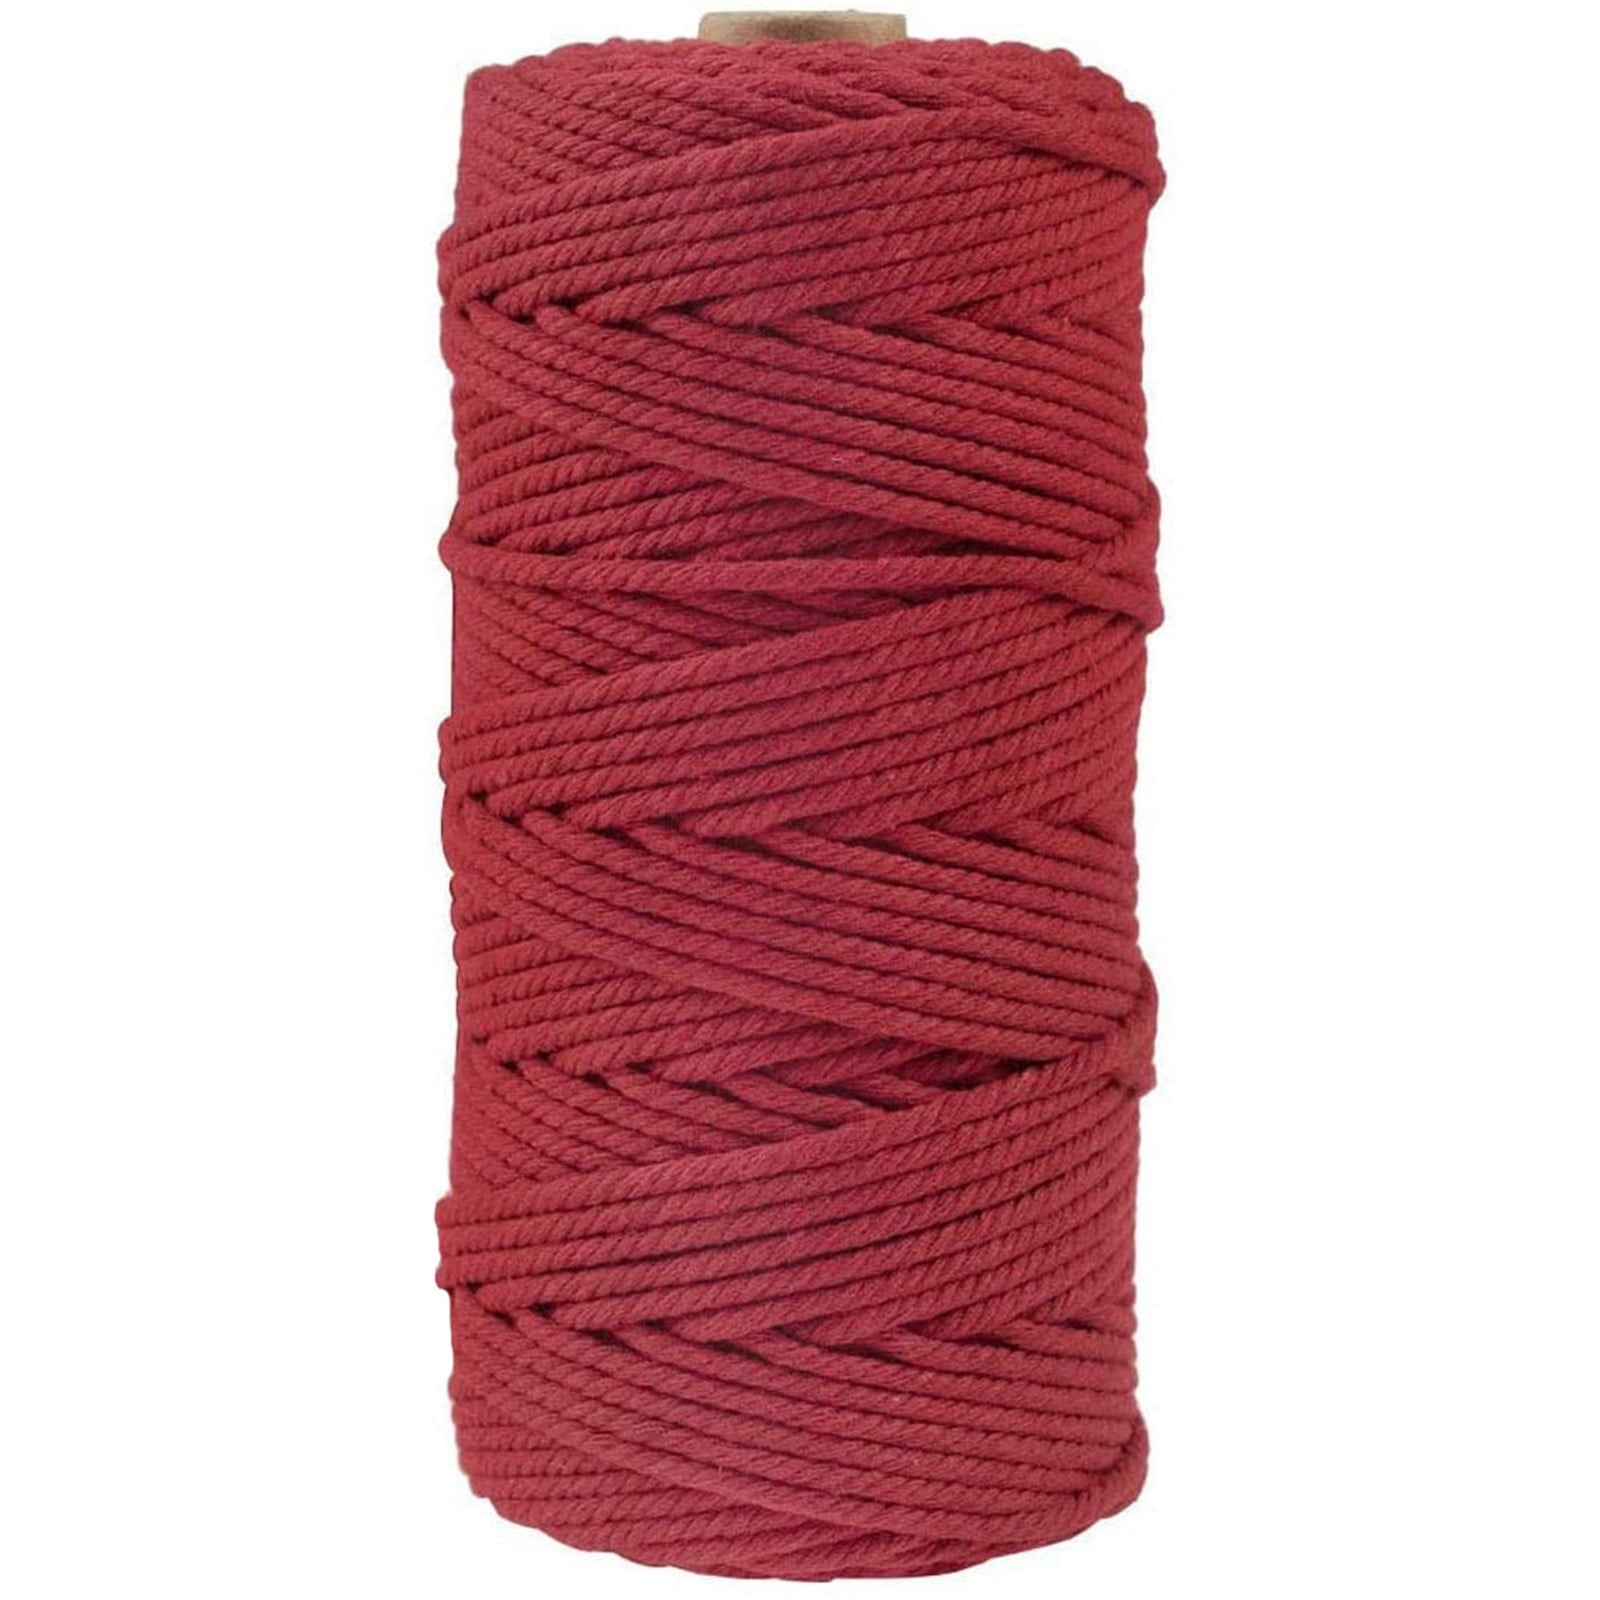 4mm Macrame Cotton Cord x 100m (109 Yards) 4ply Twisted Rope for Macrame  Project